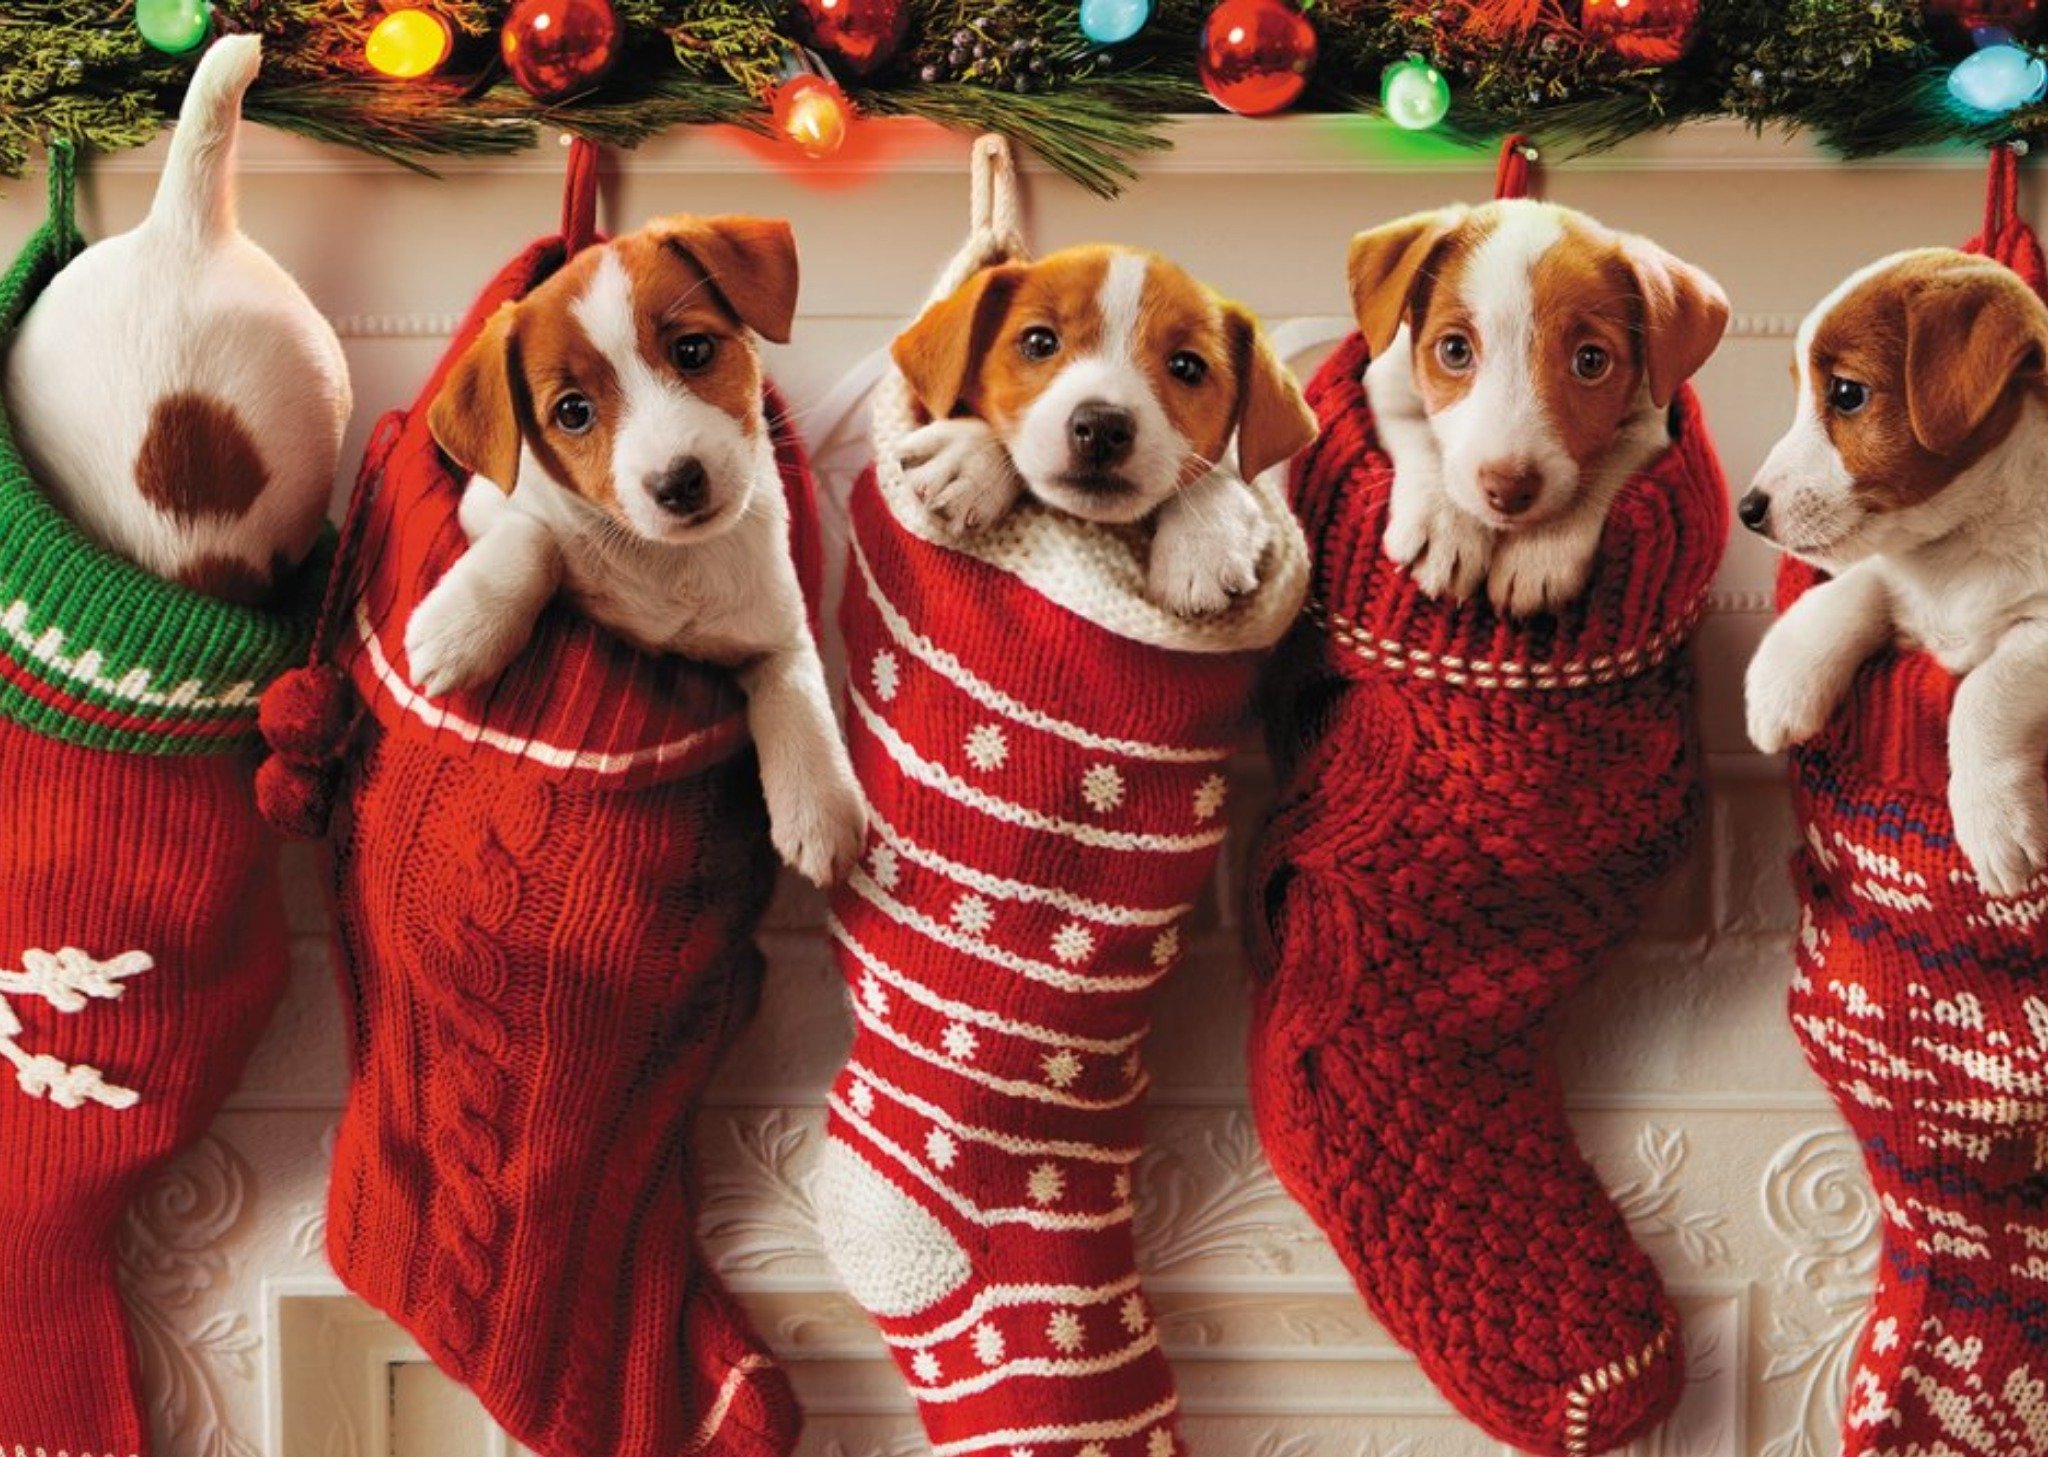 Moonpig Puppies In Stockings Christmas Card, Large